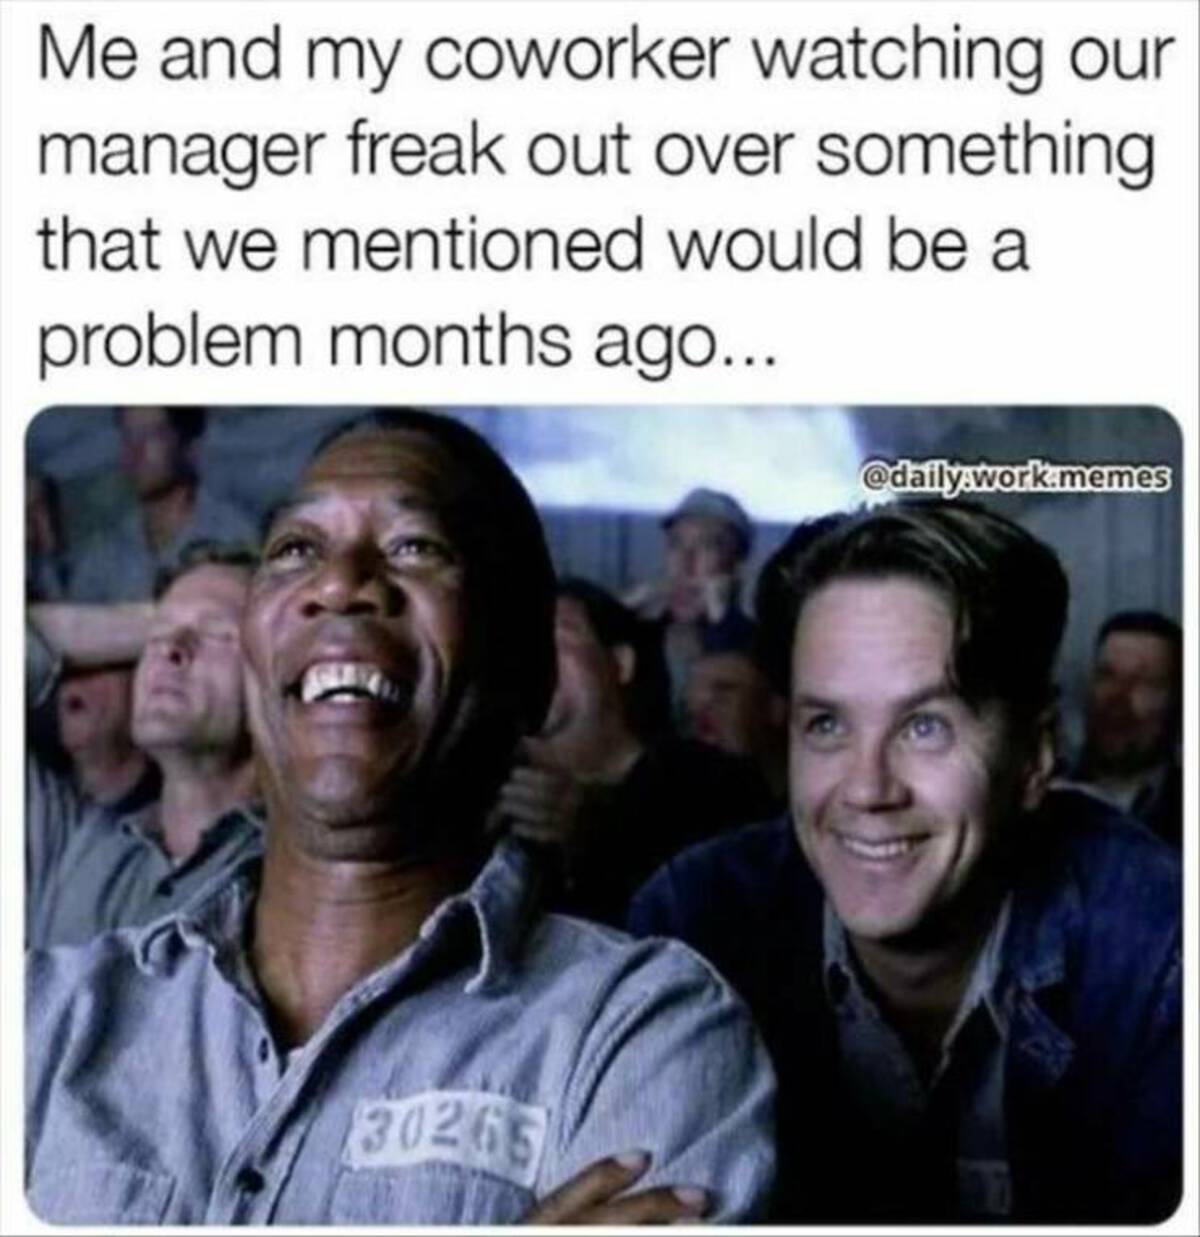 shawshank redemption cinema - Me and my coworker watching our manager freak out over something that we mentioned would be a problem months ago... .work.memes 30265